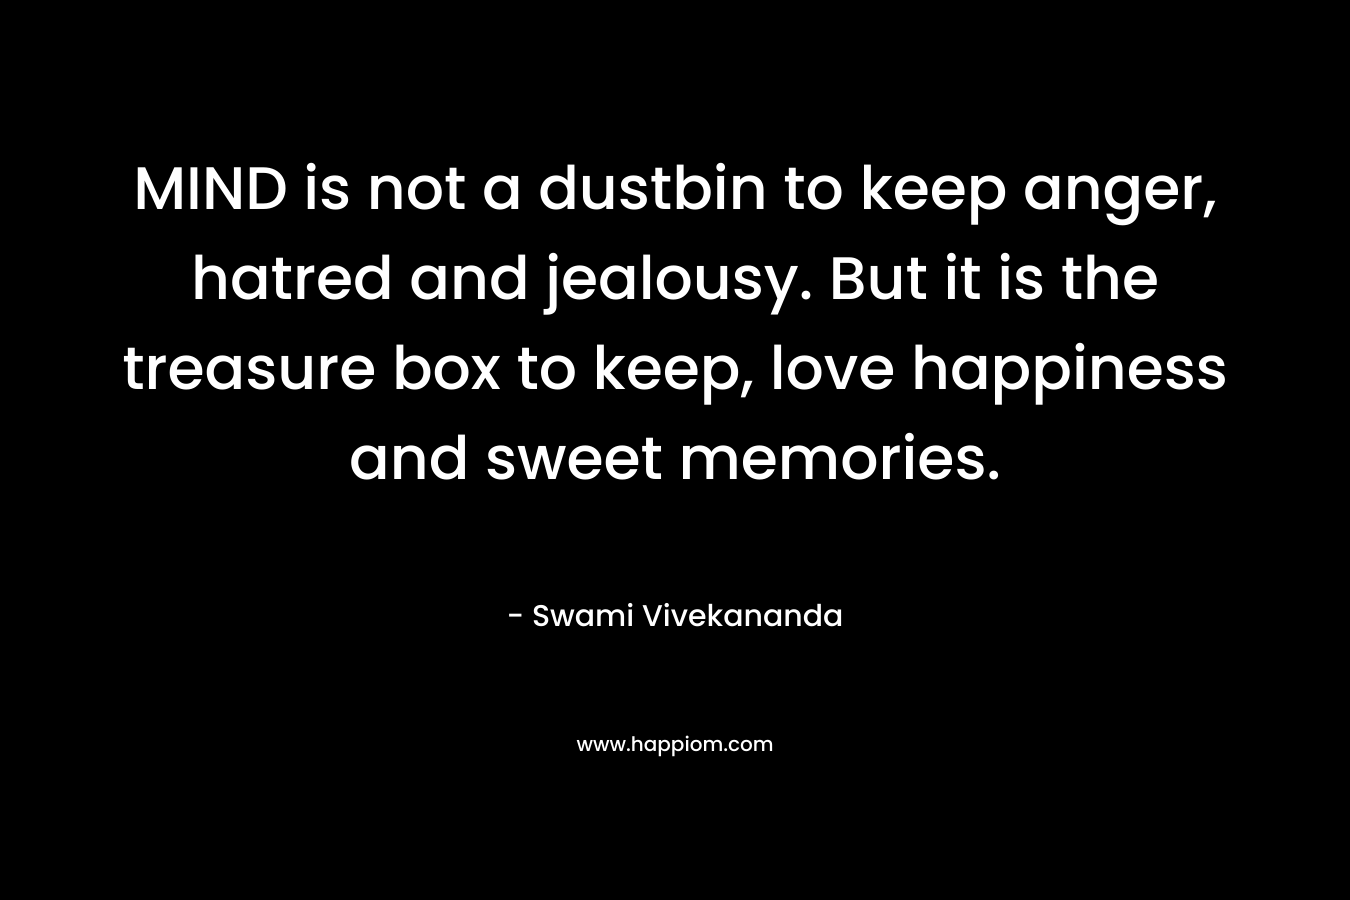 MIND is not a dustbin to keep anger, hatred and jealousy. But it is the treasure box to keep, love happiness and sweet memories. – Swami Vivekananda